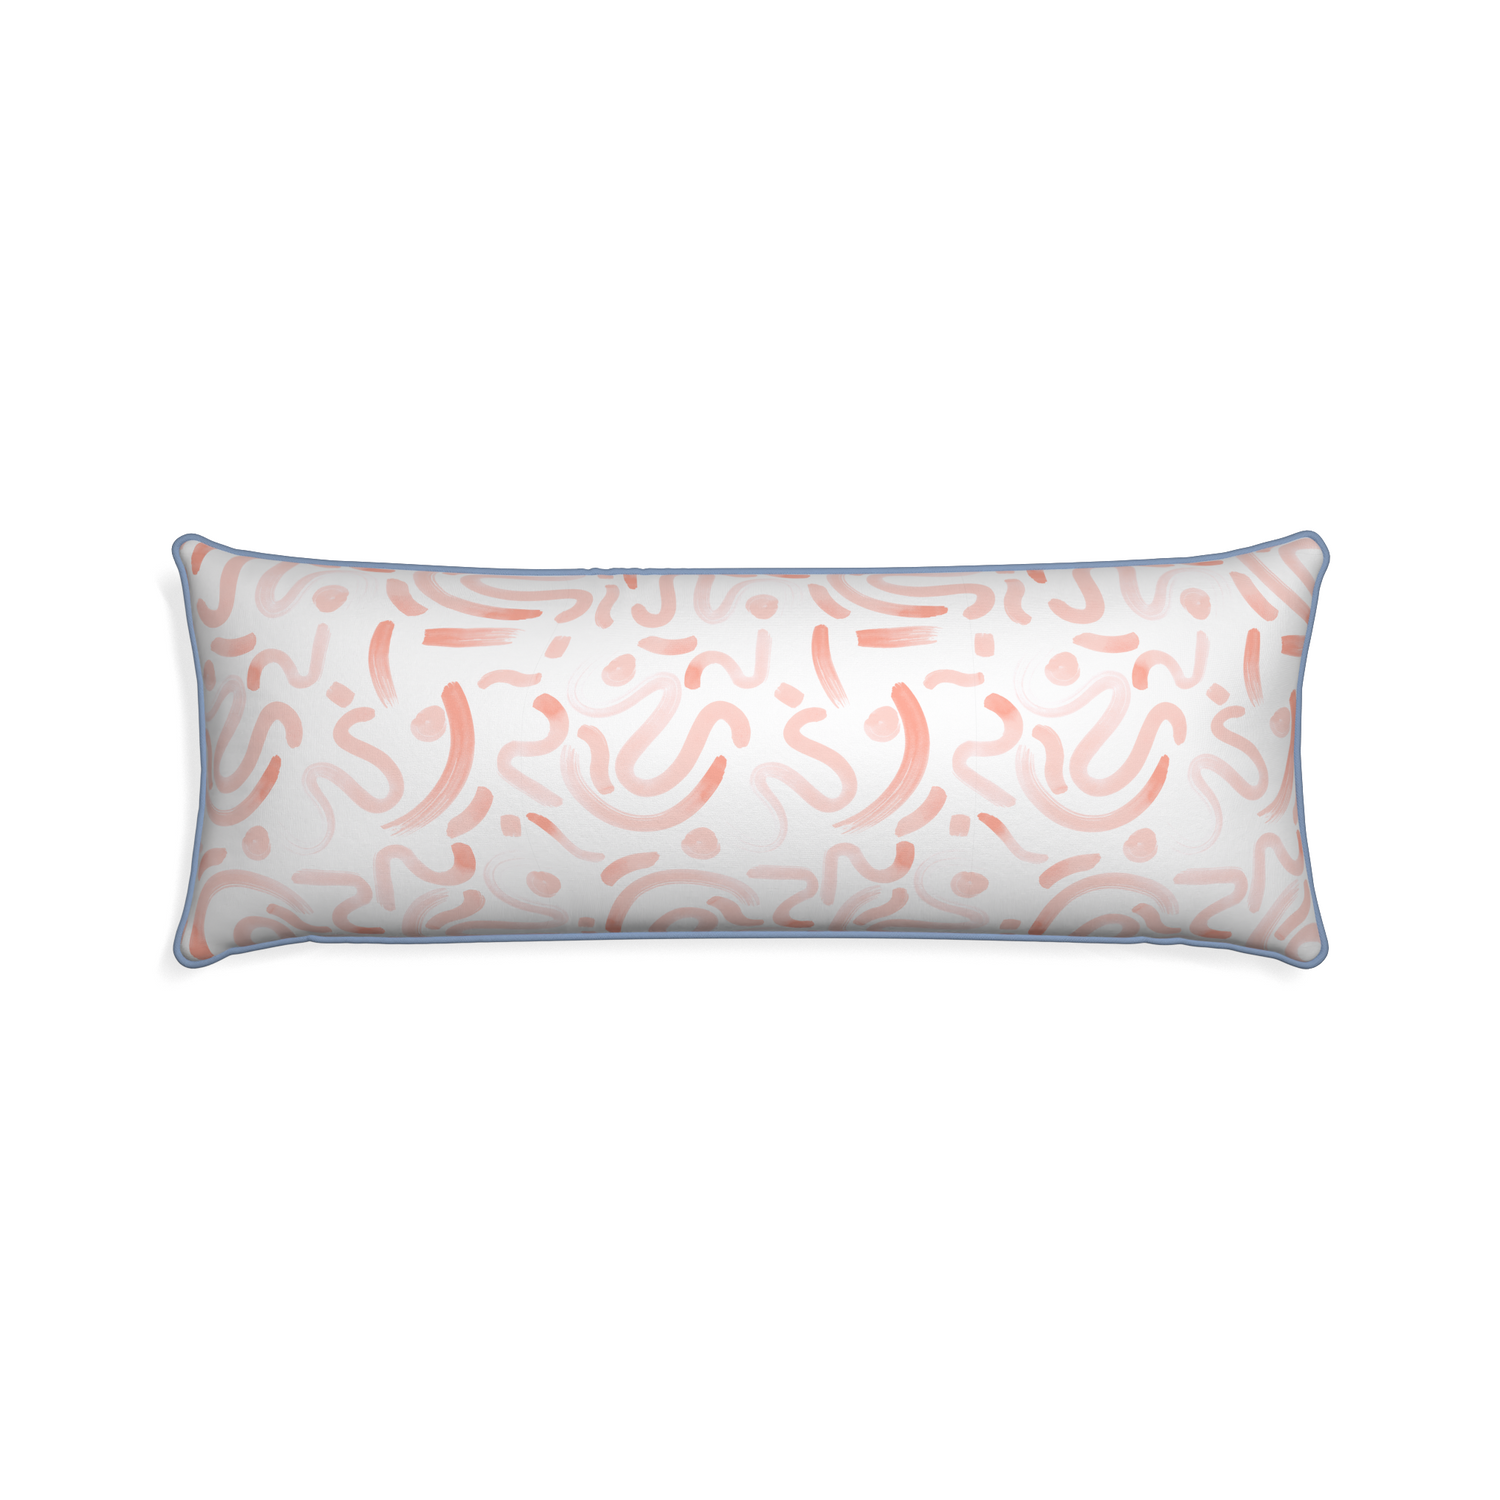 Xl-lumbar hockney pink custom pillow with sky piping on white background